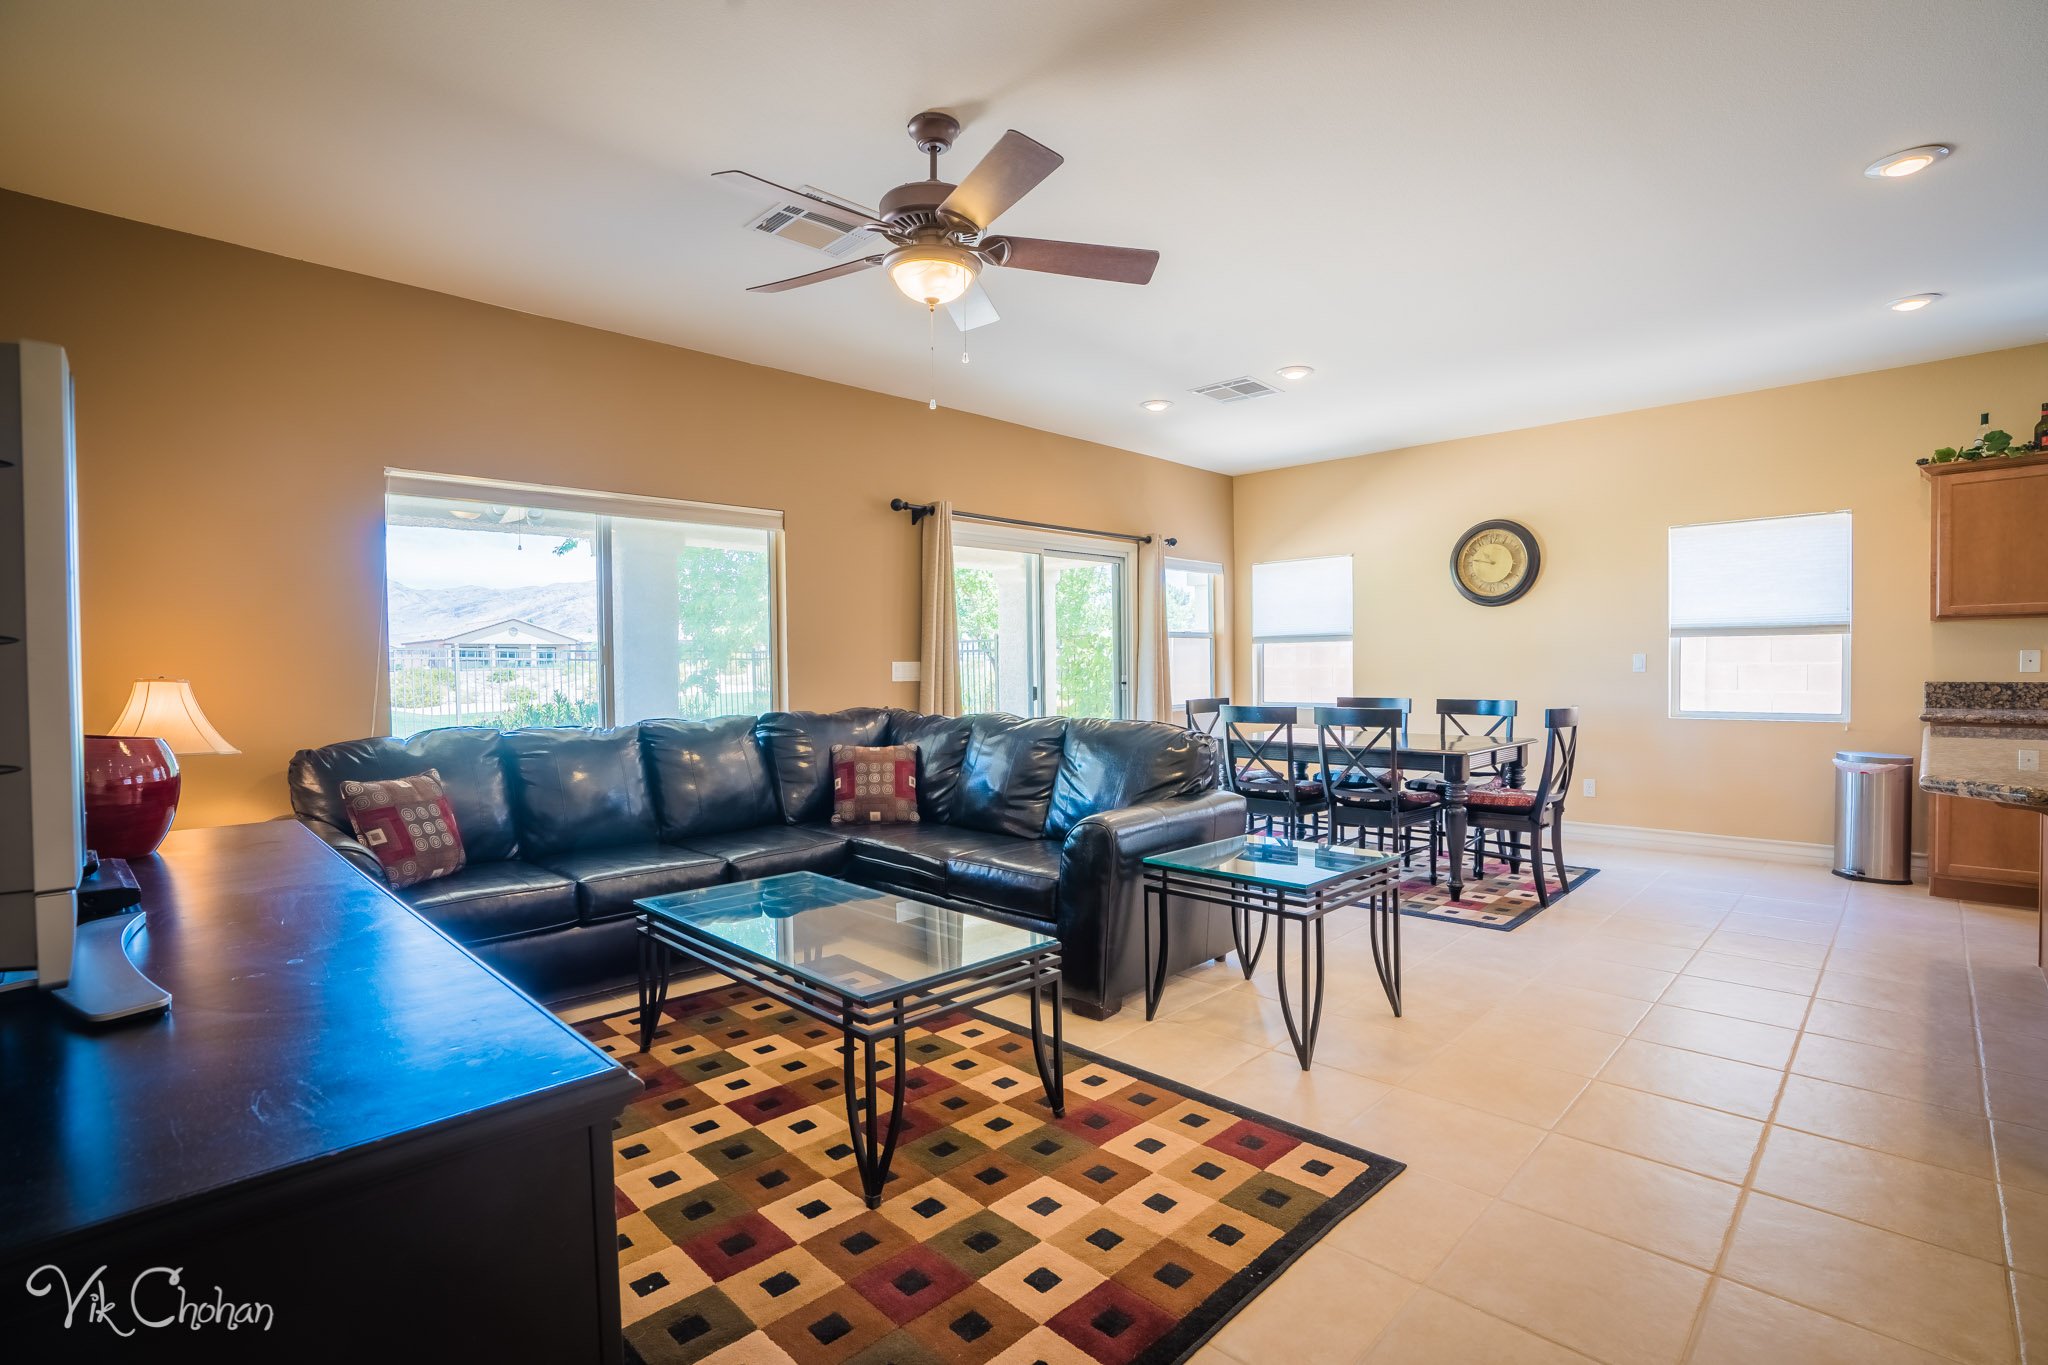 2022-05-15-5378-E-Cansano-St-Pahrump-Real-Estate-Photography-Virtual-Tour-Drone-Photography-Vik-Chohan-Photography-Photo-Booth-Social-Media-VCP-017.jpg